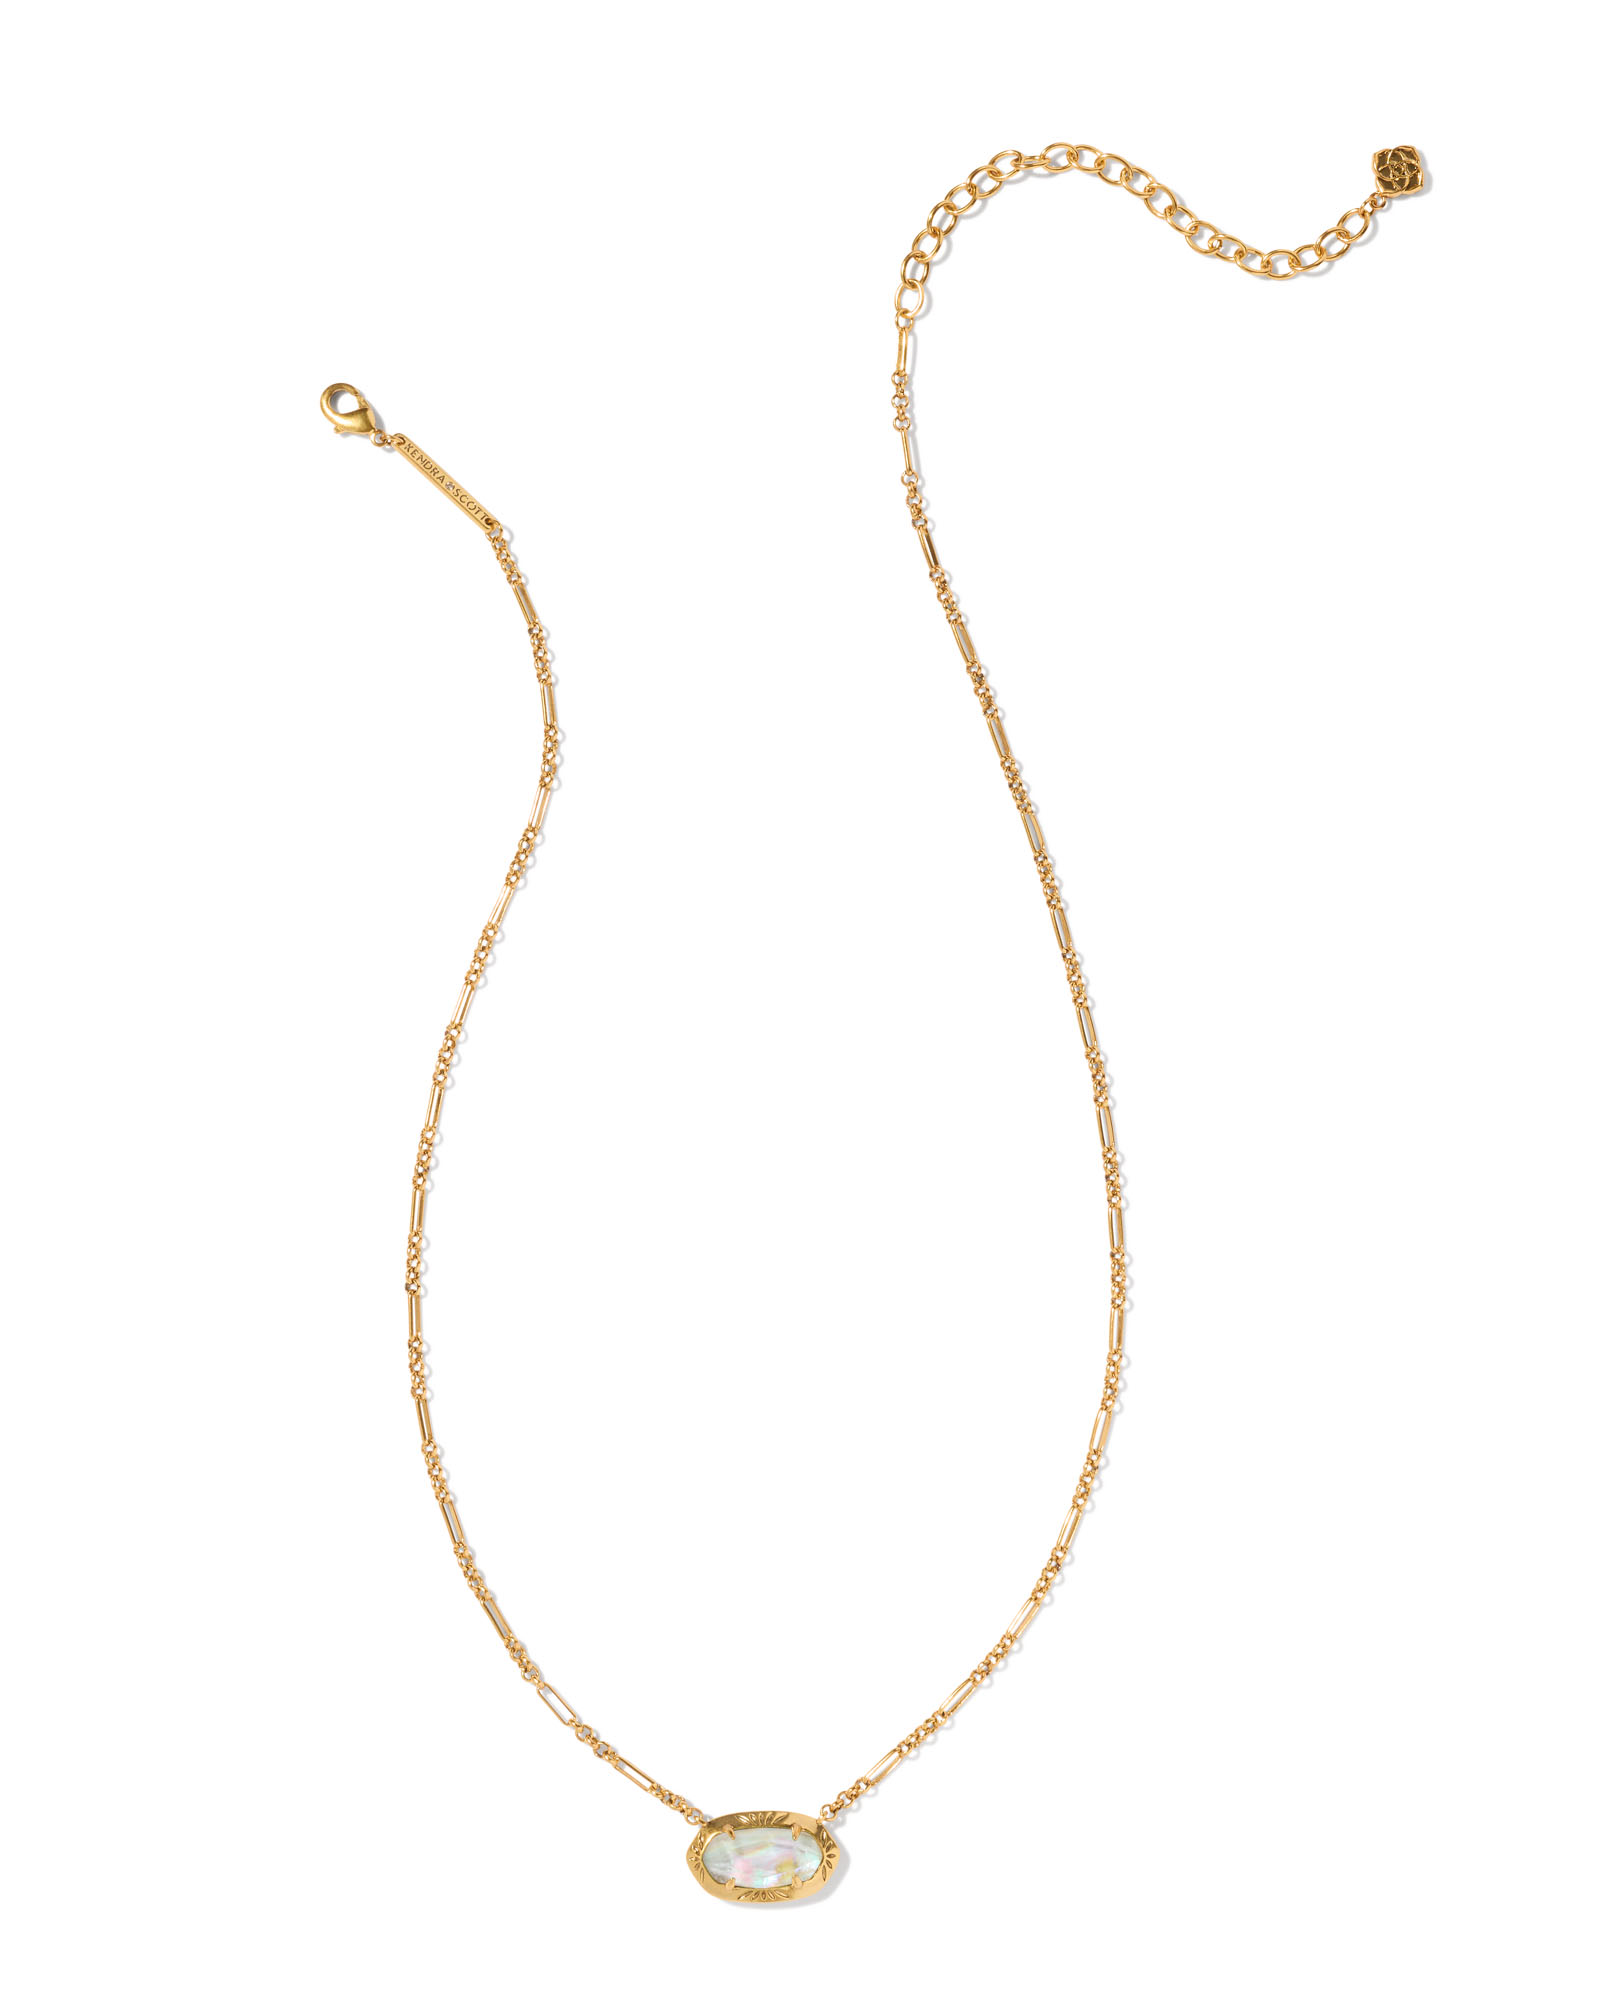 Daphne Convertible Gold Link and Chain Necklace in Light Pink Iridescent  Abalone | Kendra Scott